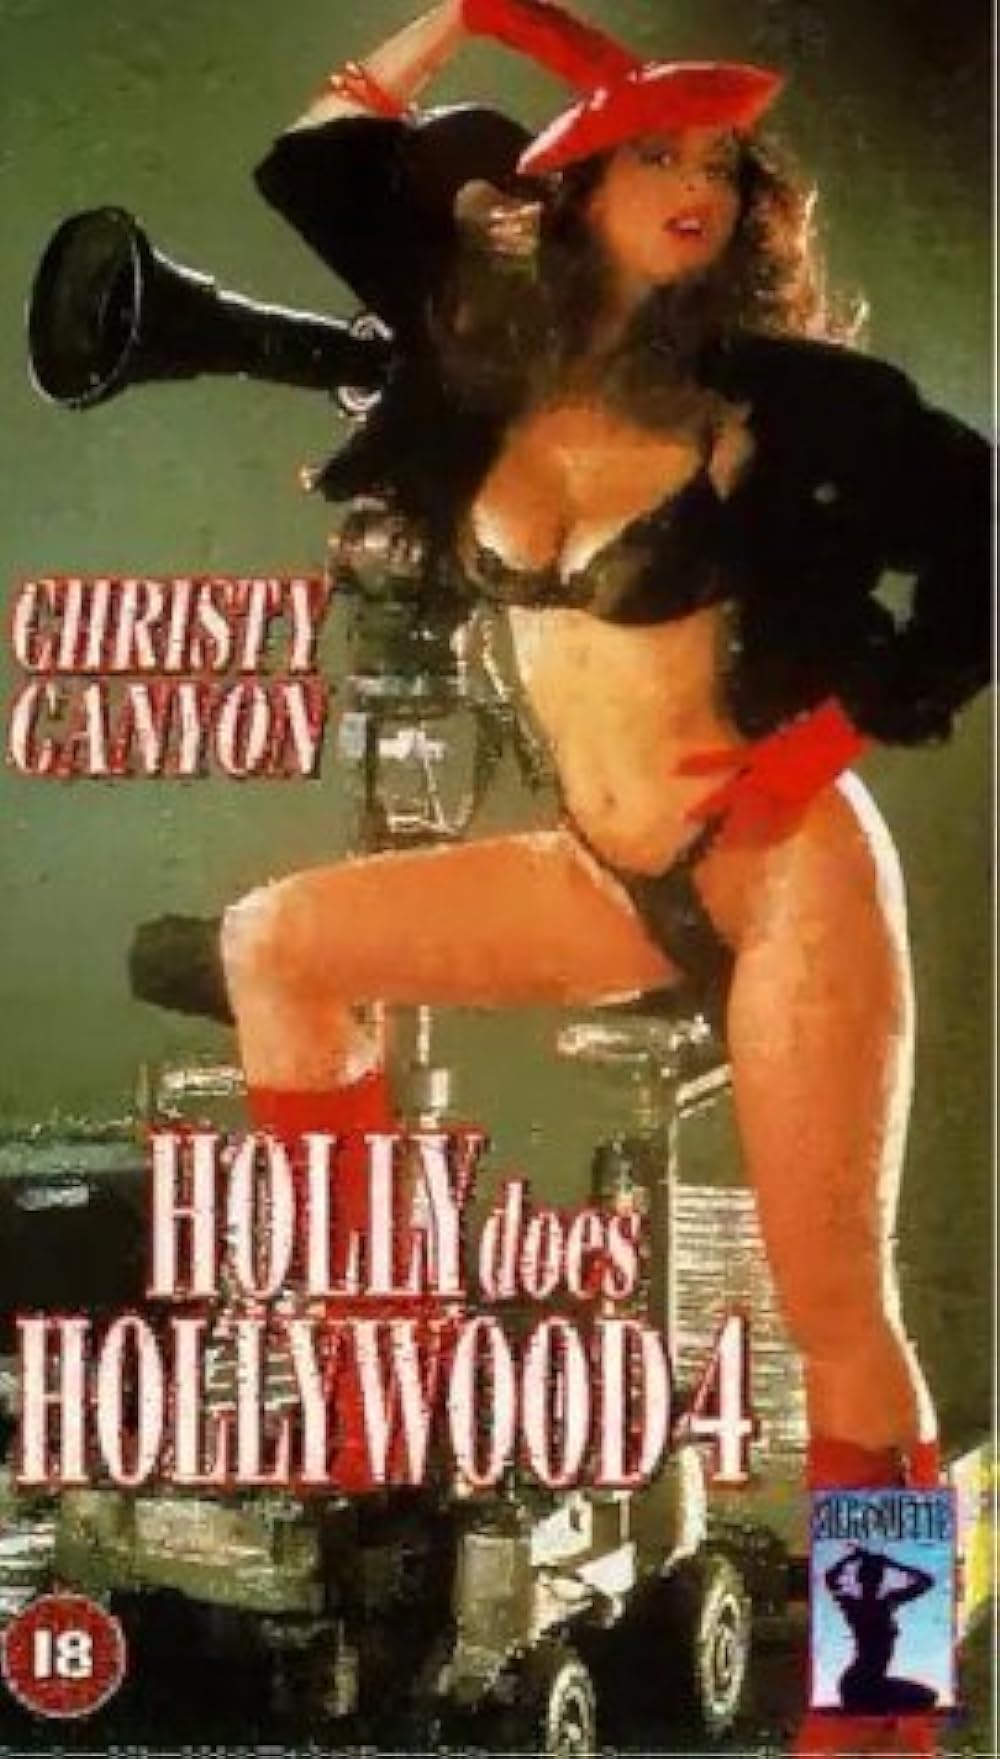 Best of Holly does hollywood 1985